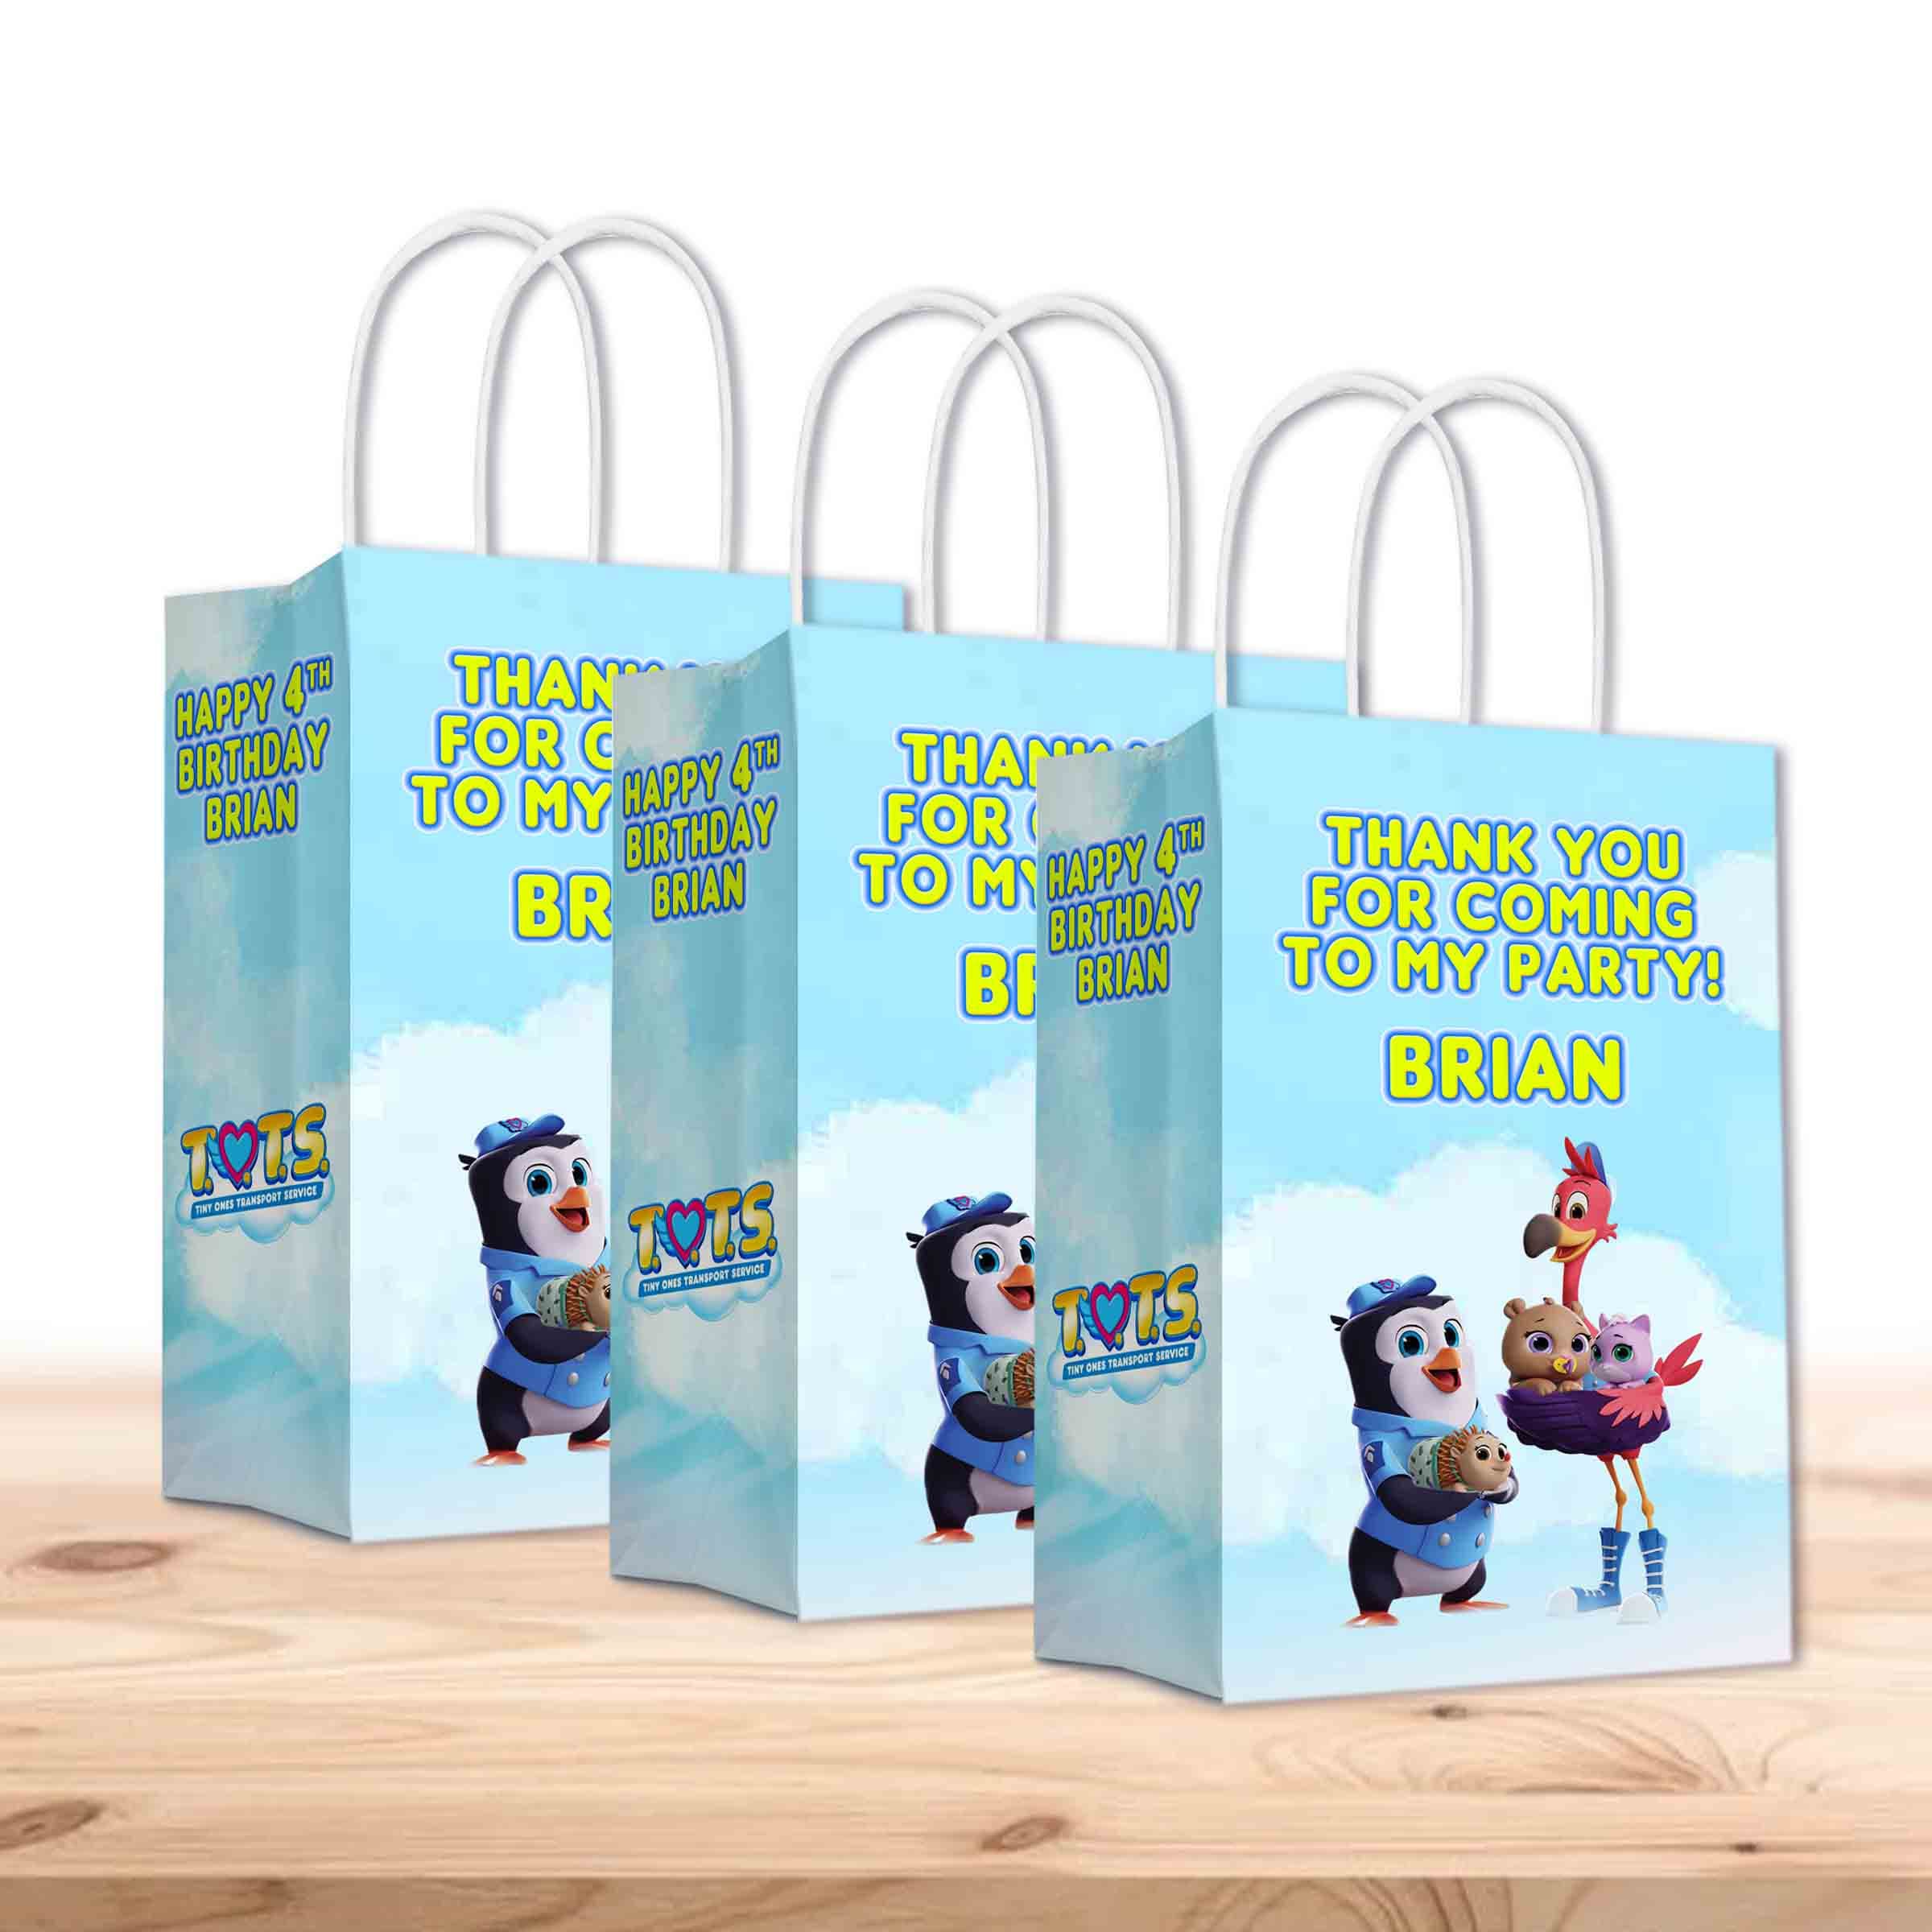 HONGFENG 12 Pack Party Gift Bags for Five Nights at Freddy's Party Supplies,  Candy Bags Goodie Bags Party Favor Bags for Children Five Nights at  Freddy's Theme Birthday Party Supplies Decorations 